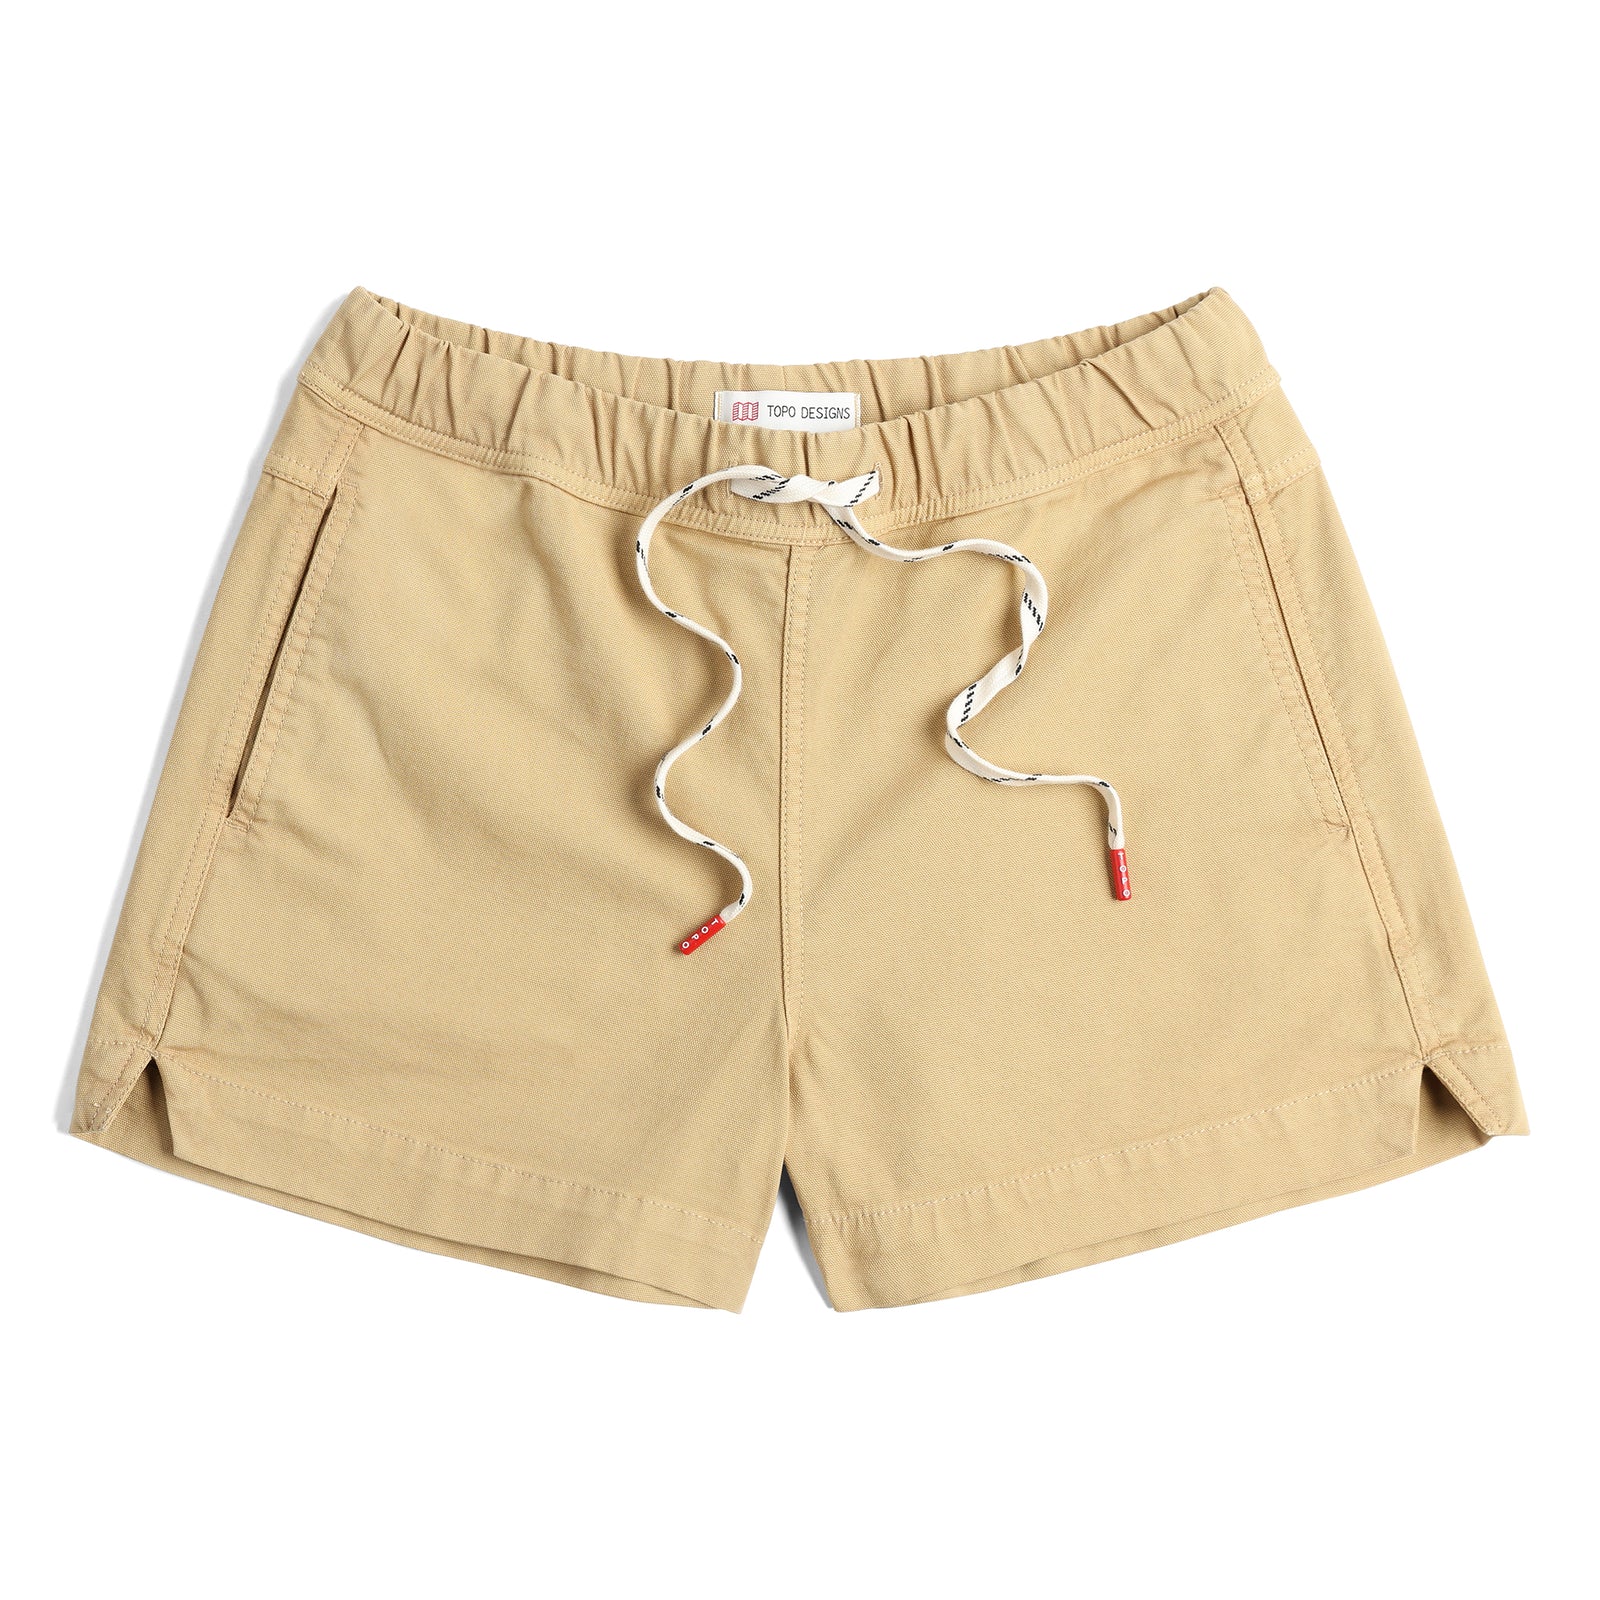 Front View of Topo Designs Dirt Shorts - Women's in "Sahara"